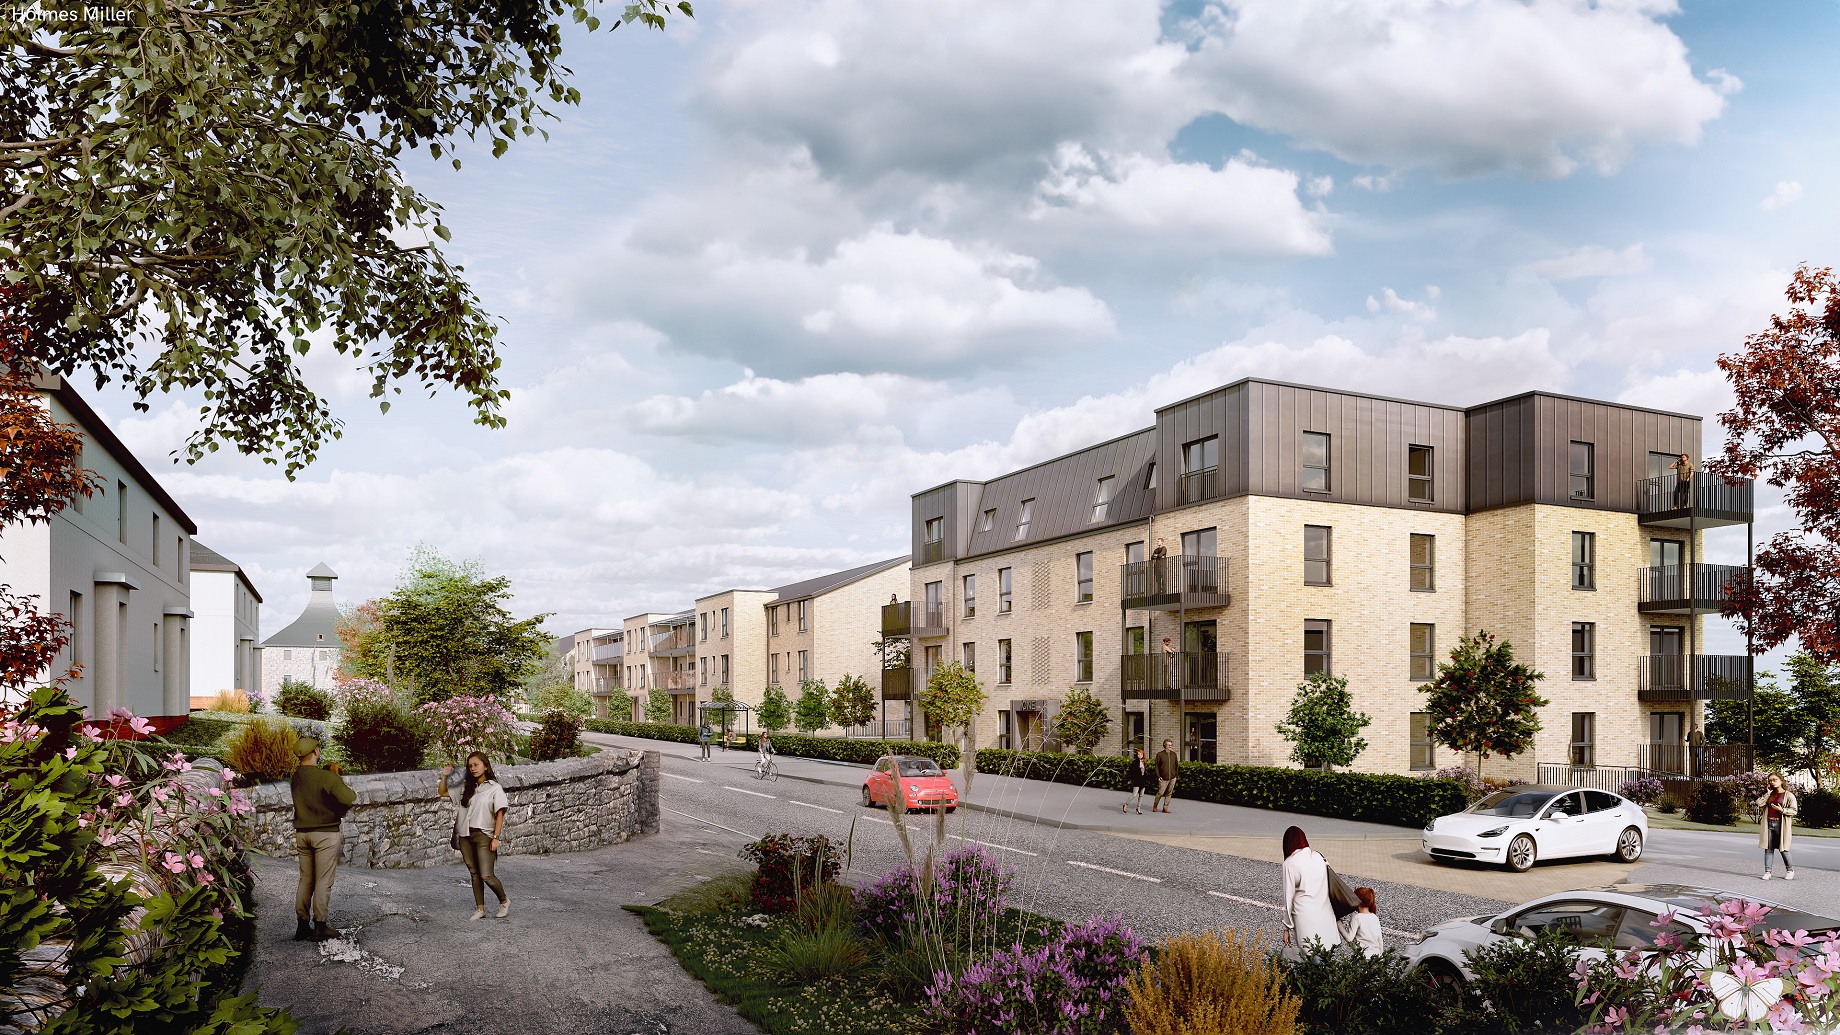 Private apartments granted planning approval in Linlithgow